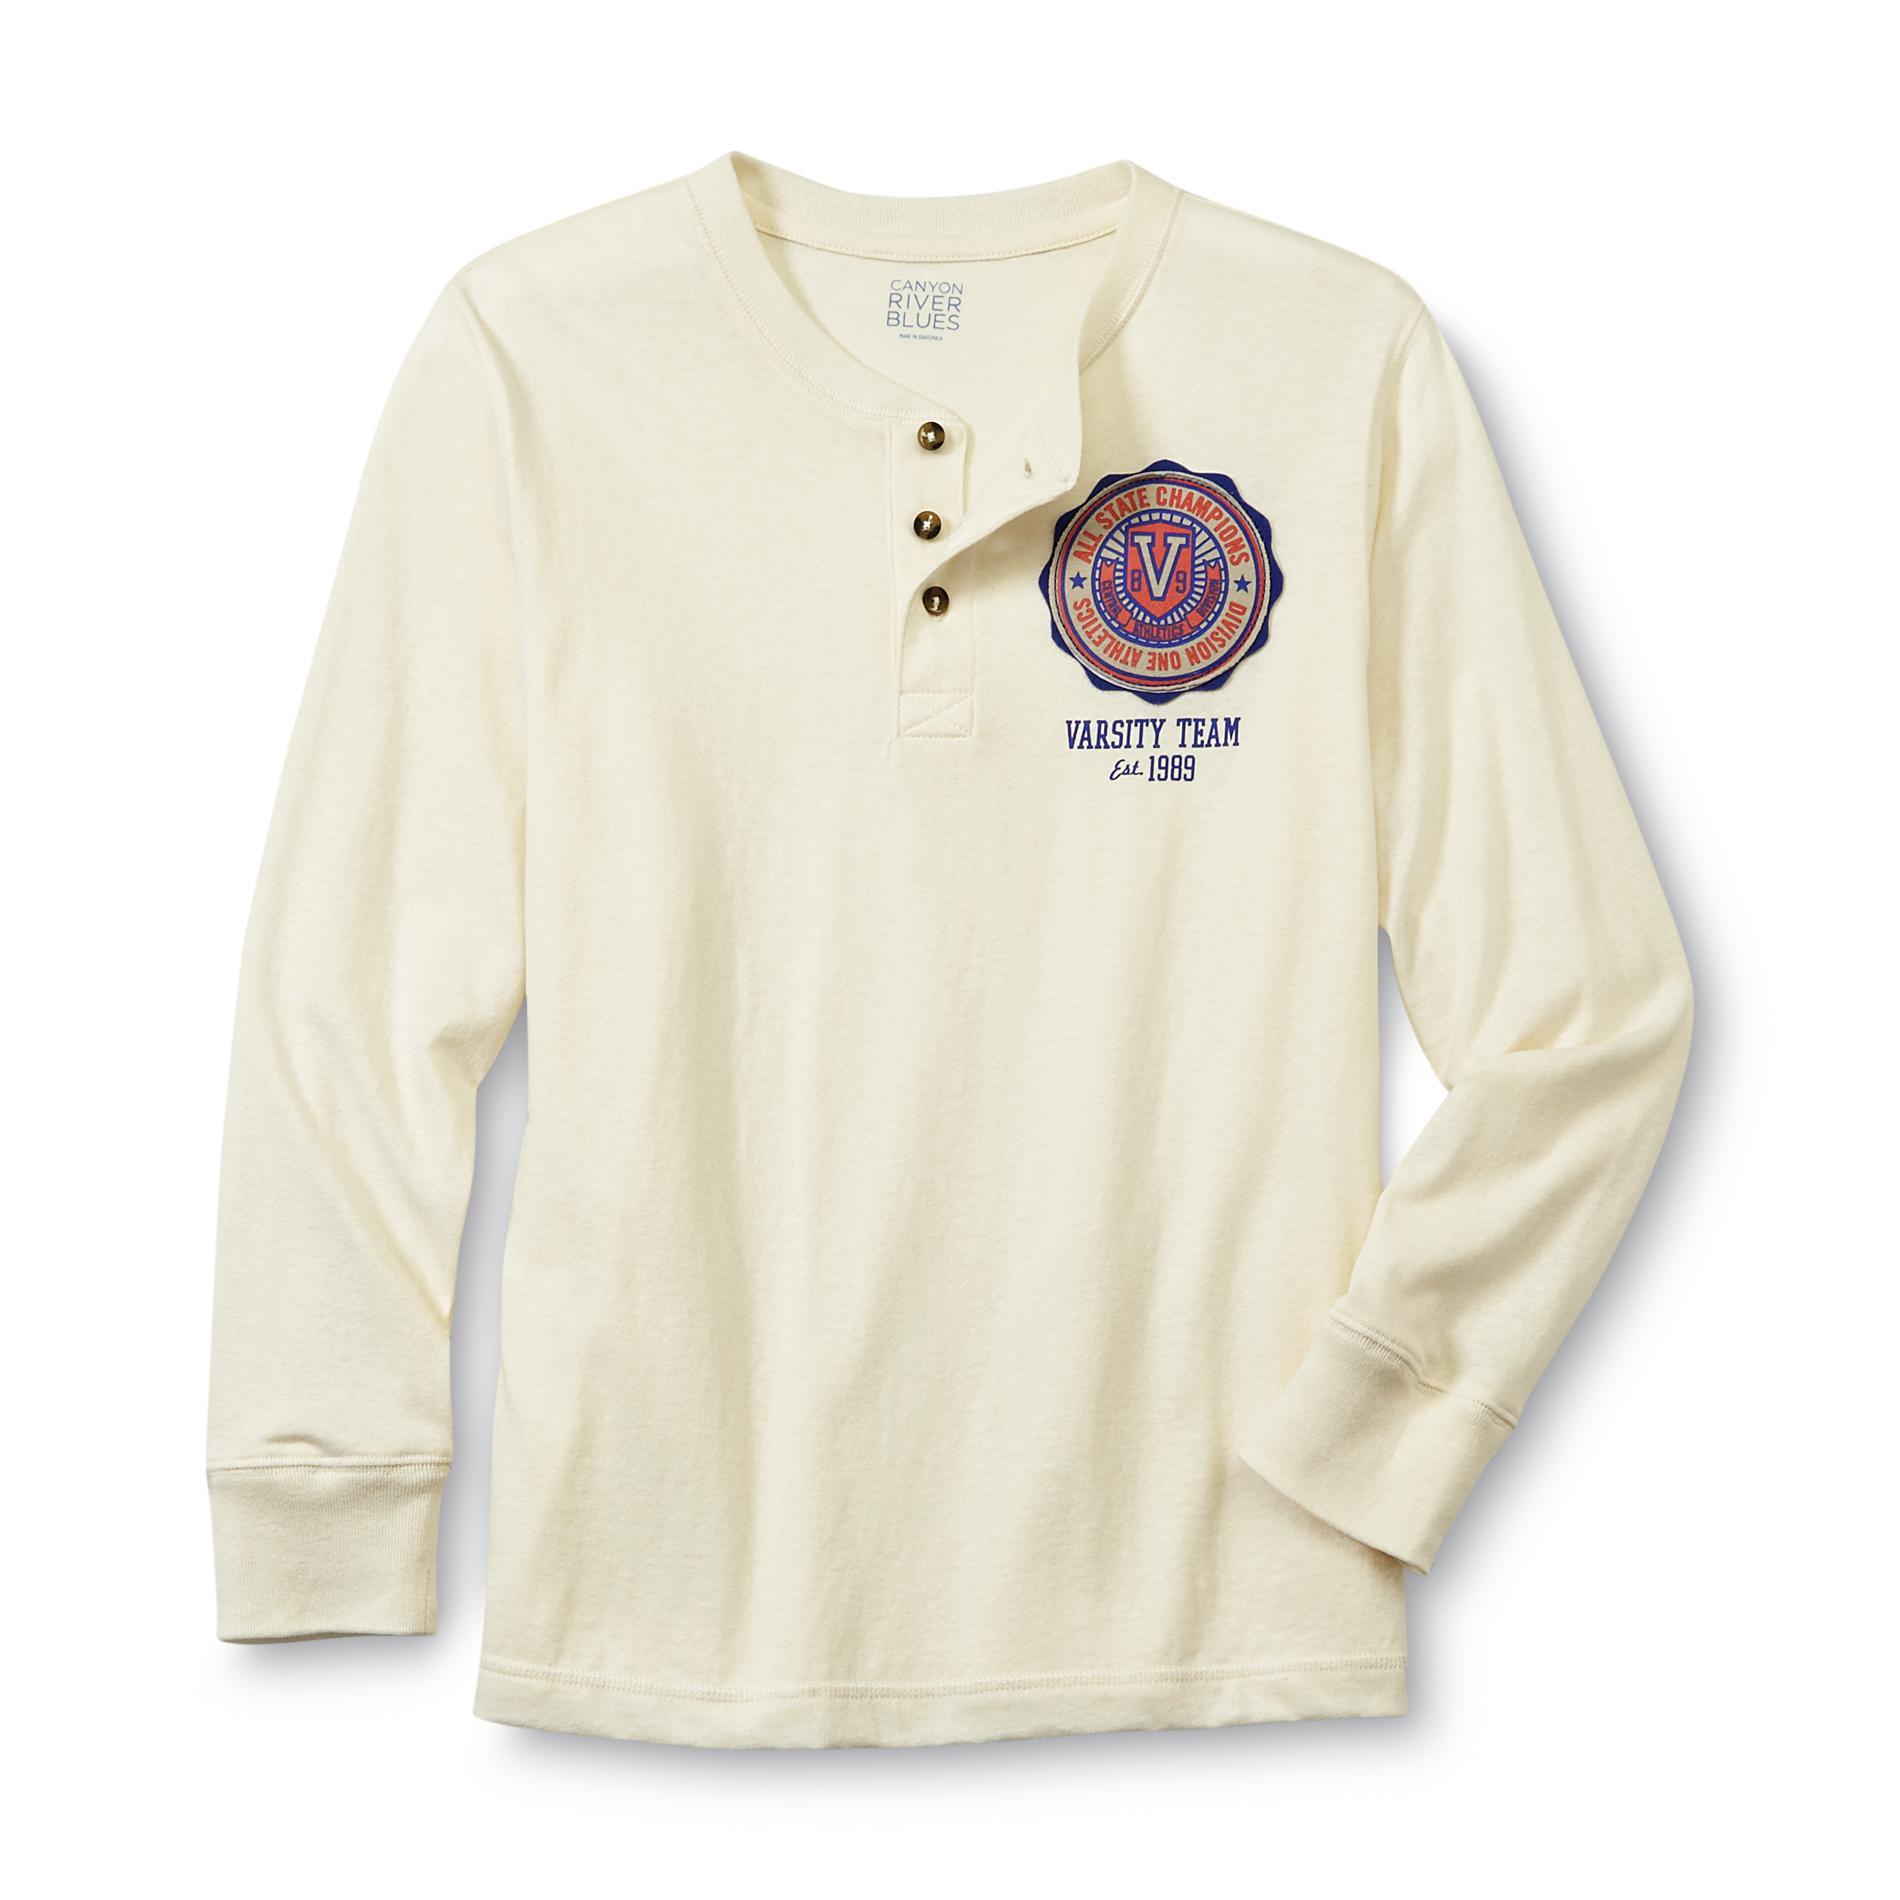 Canyon River Blues Boy's Henley Shirt - All State Champs